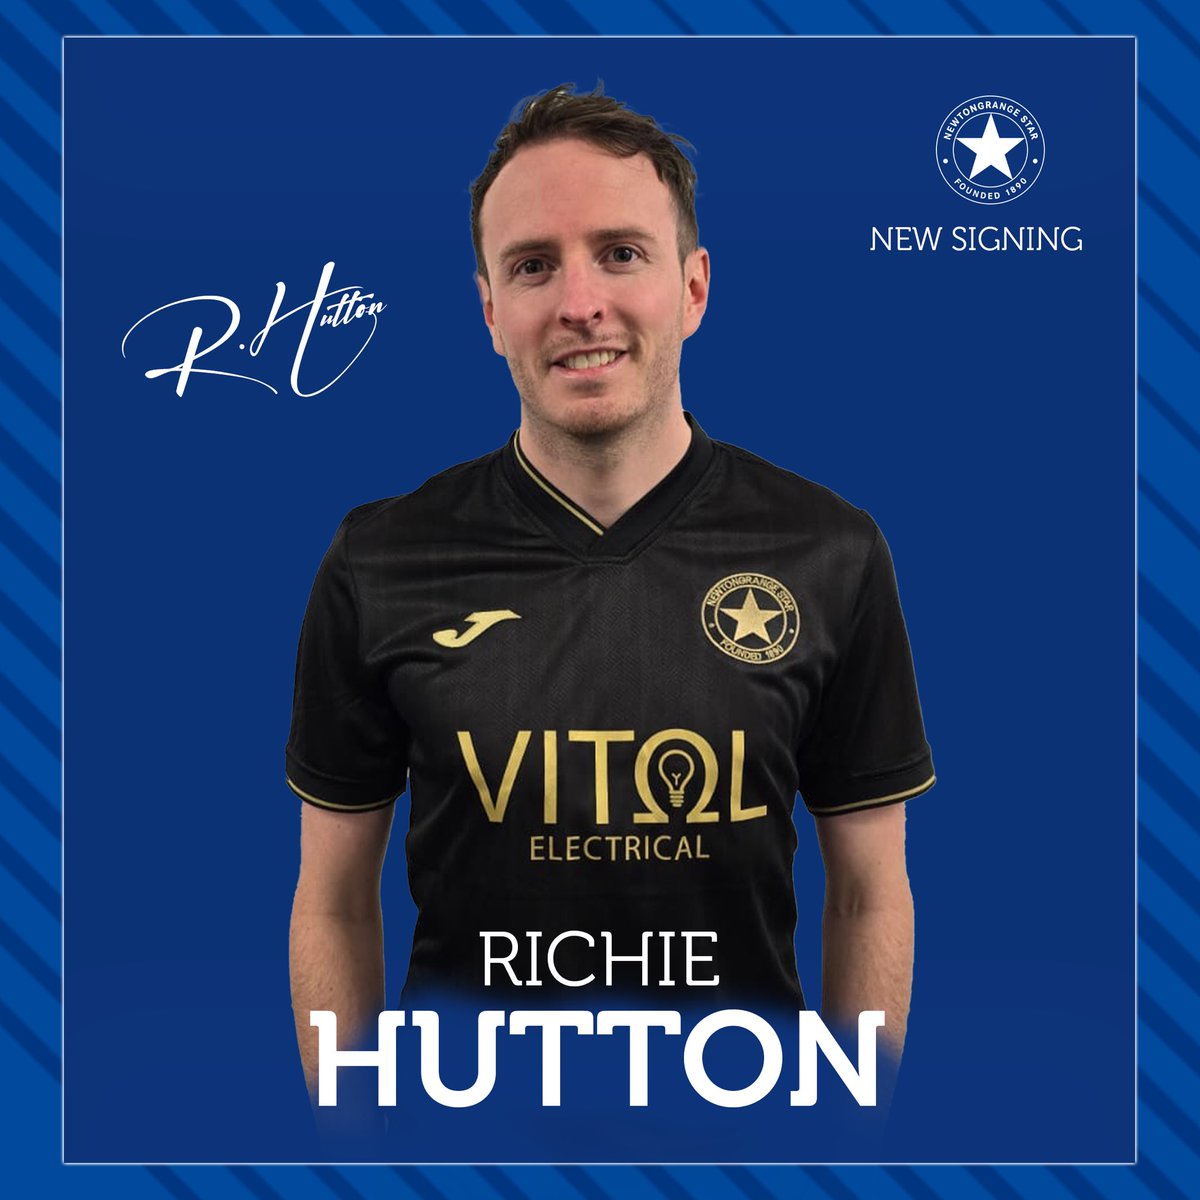 ✍️ Newtongrange Star are delighted to confirm, subject to SFA approval, the signing of experienced attacking player Richie Hutton from Blackburn United. Paul Milligan “Richie is someone I have liked for some time. He is a versatile attacking player who can play in any of the